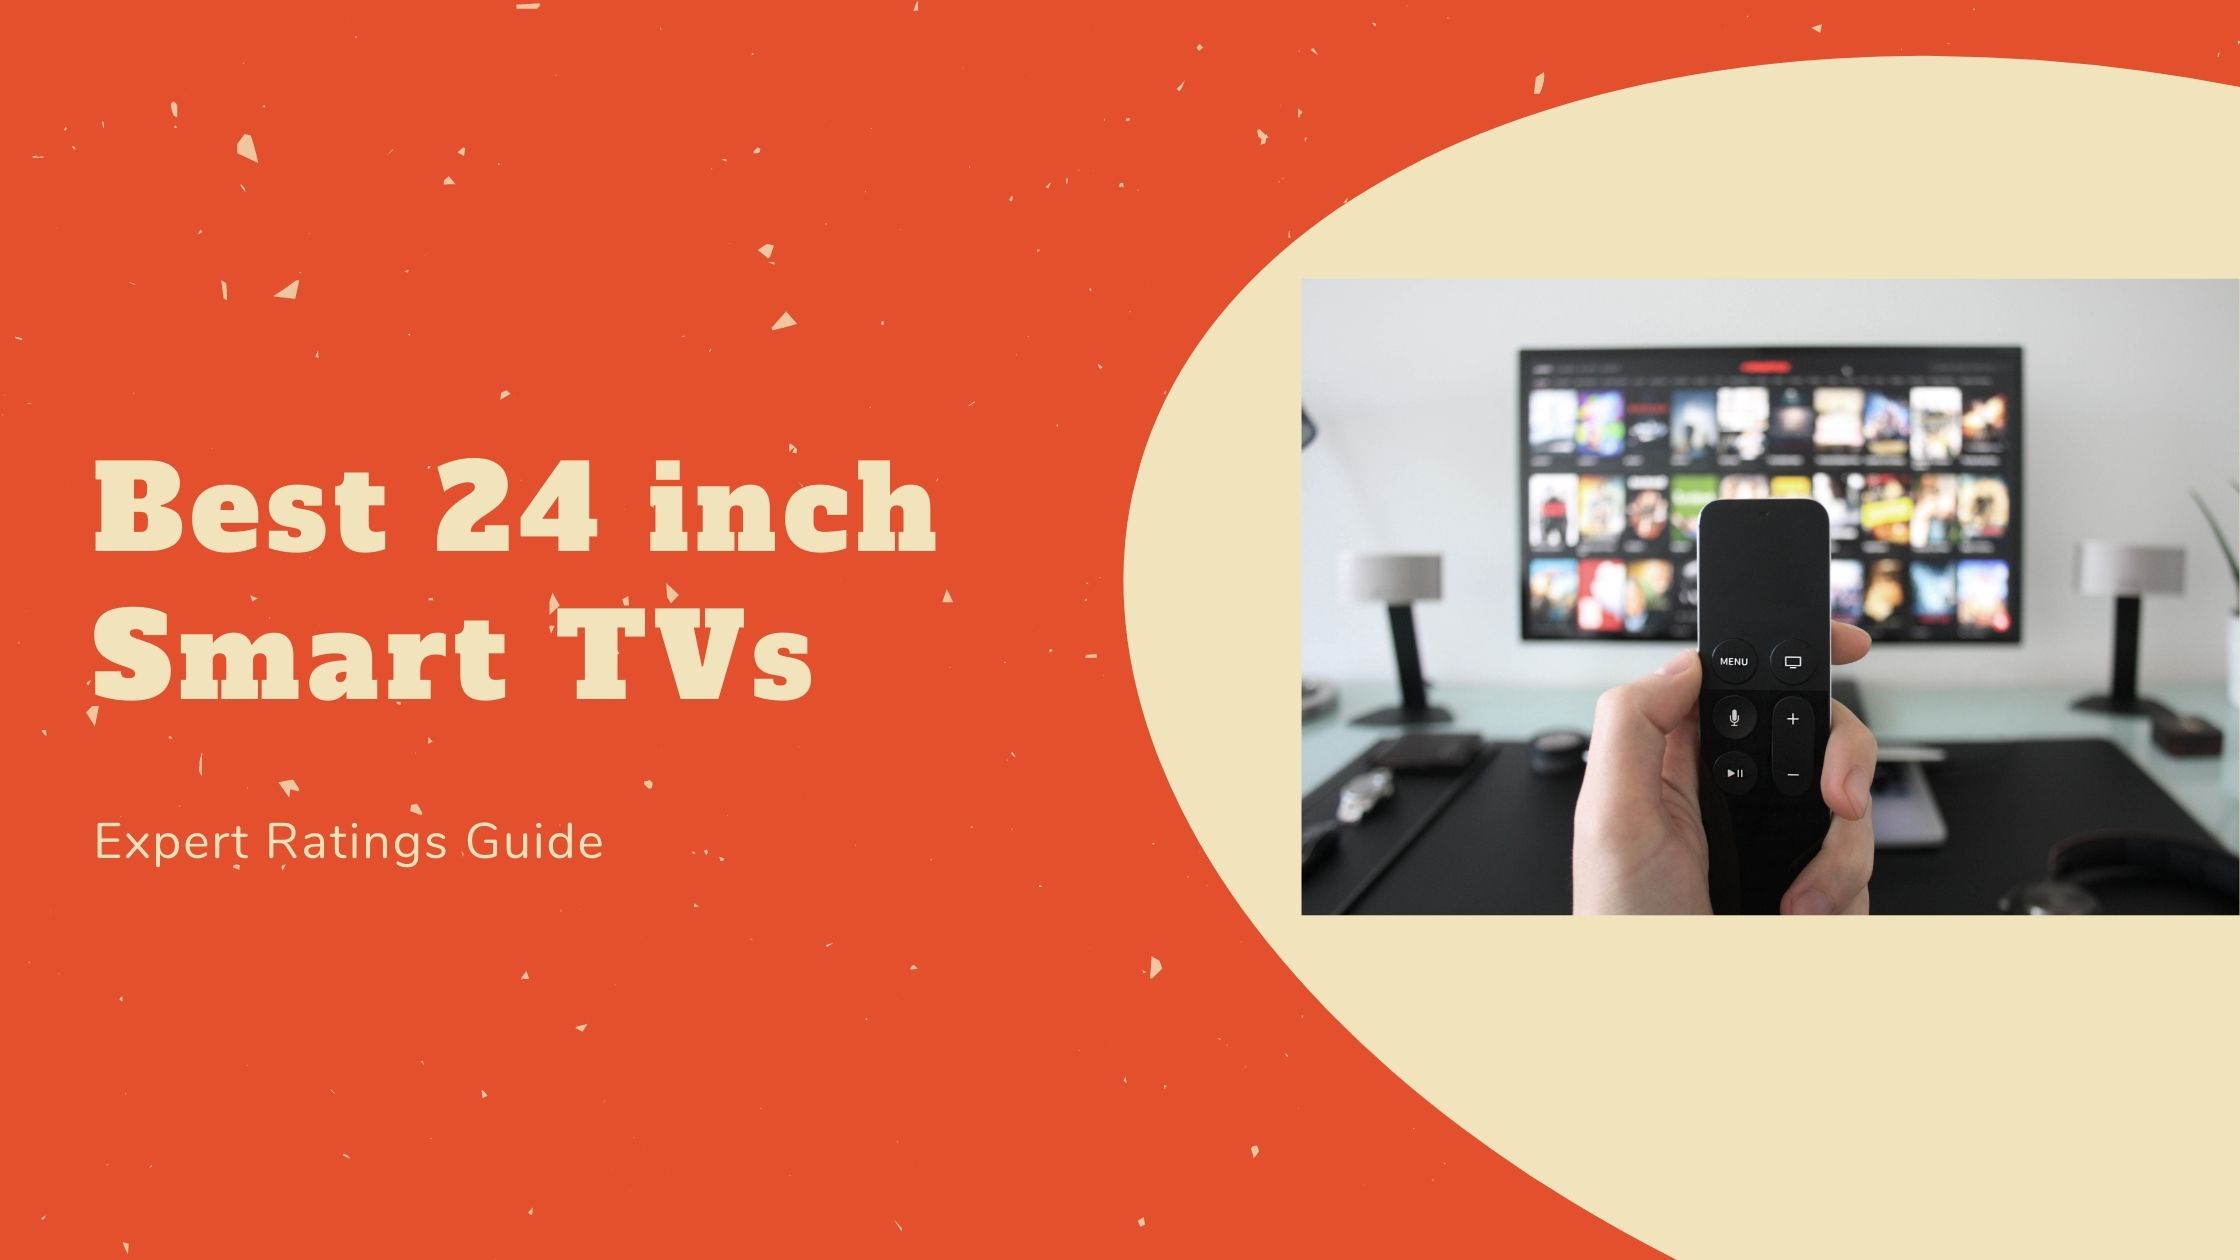 Top 10 Best 24 inch Smart TV that you can find right now